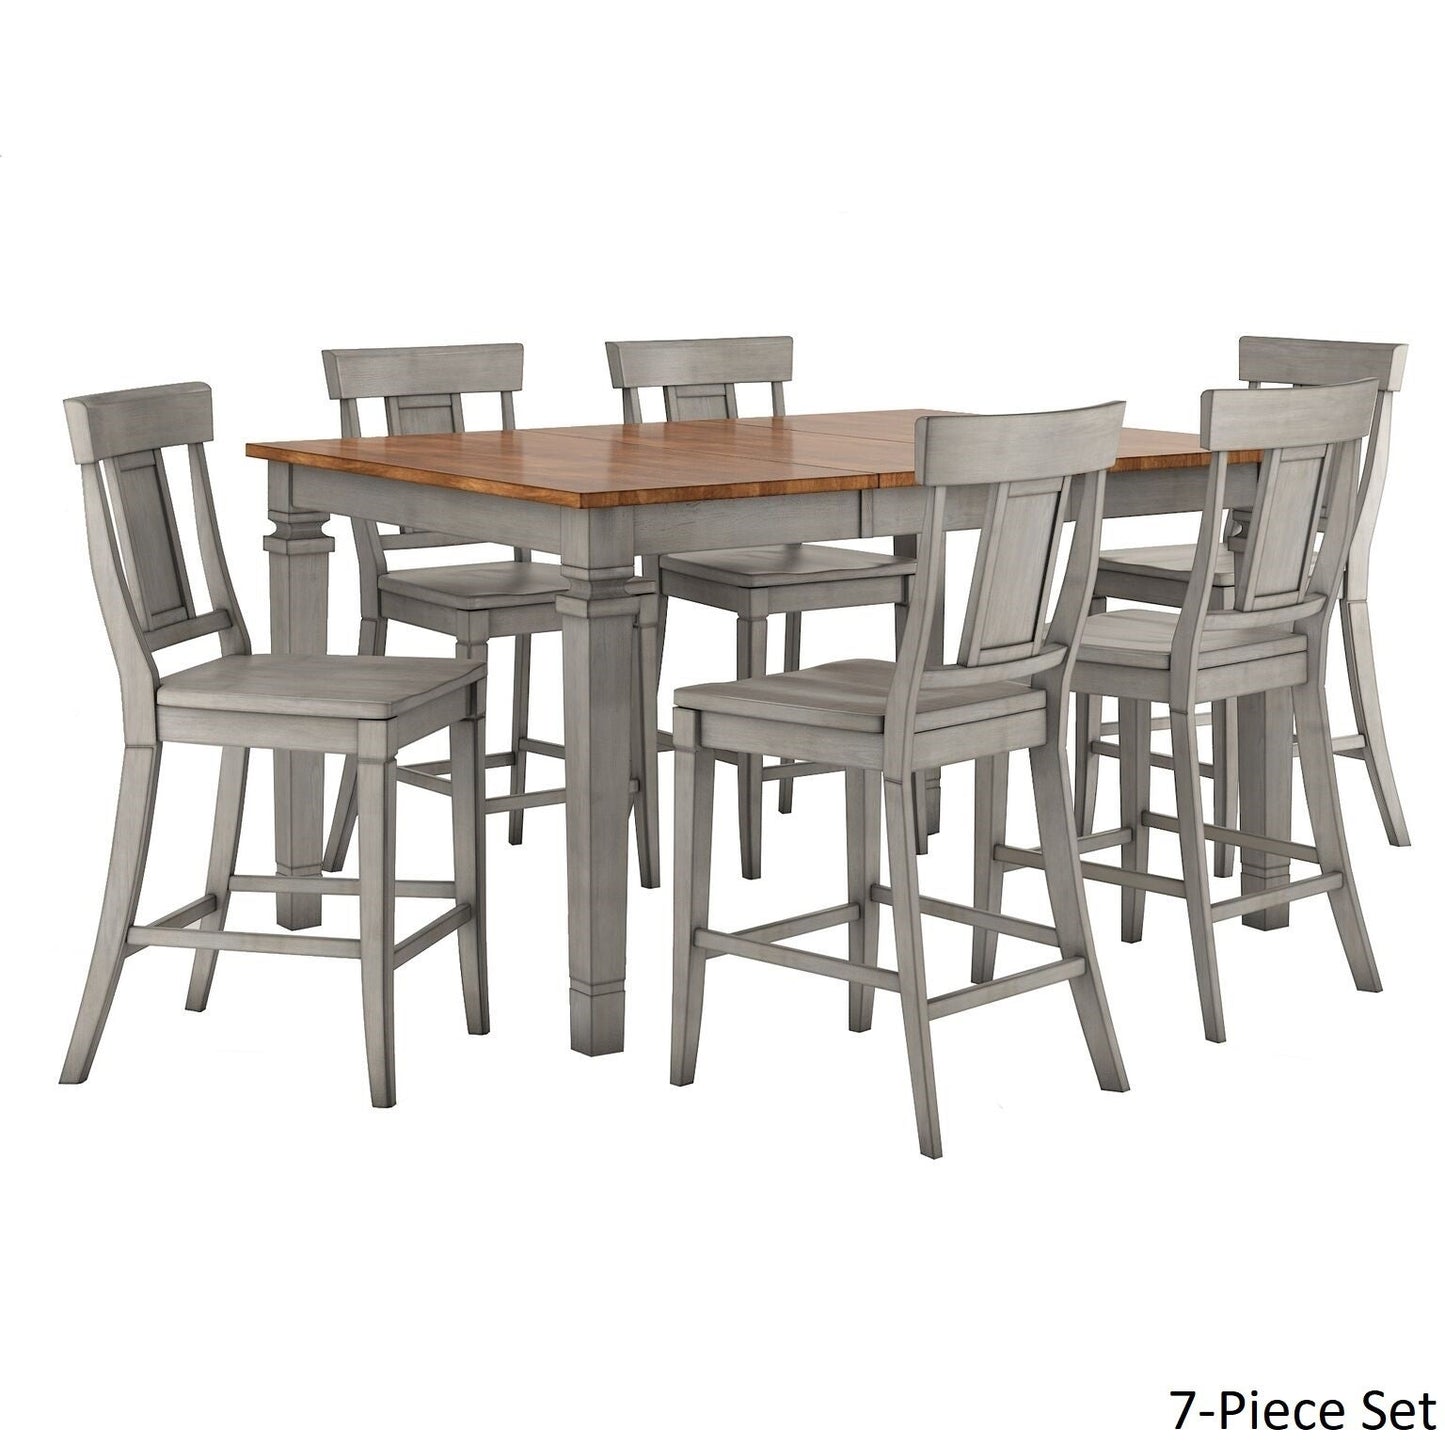 Antique Grey Extendable Counter Height Dining Set - 7-Piece Set